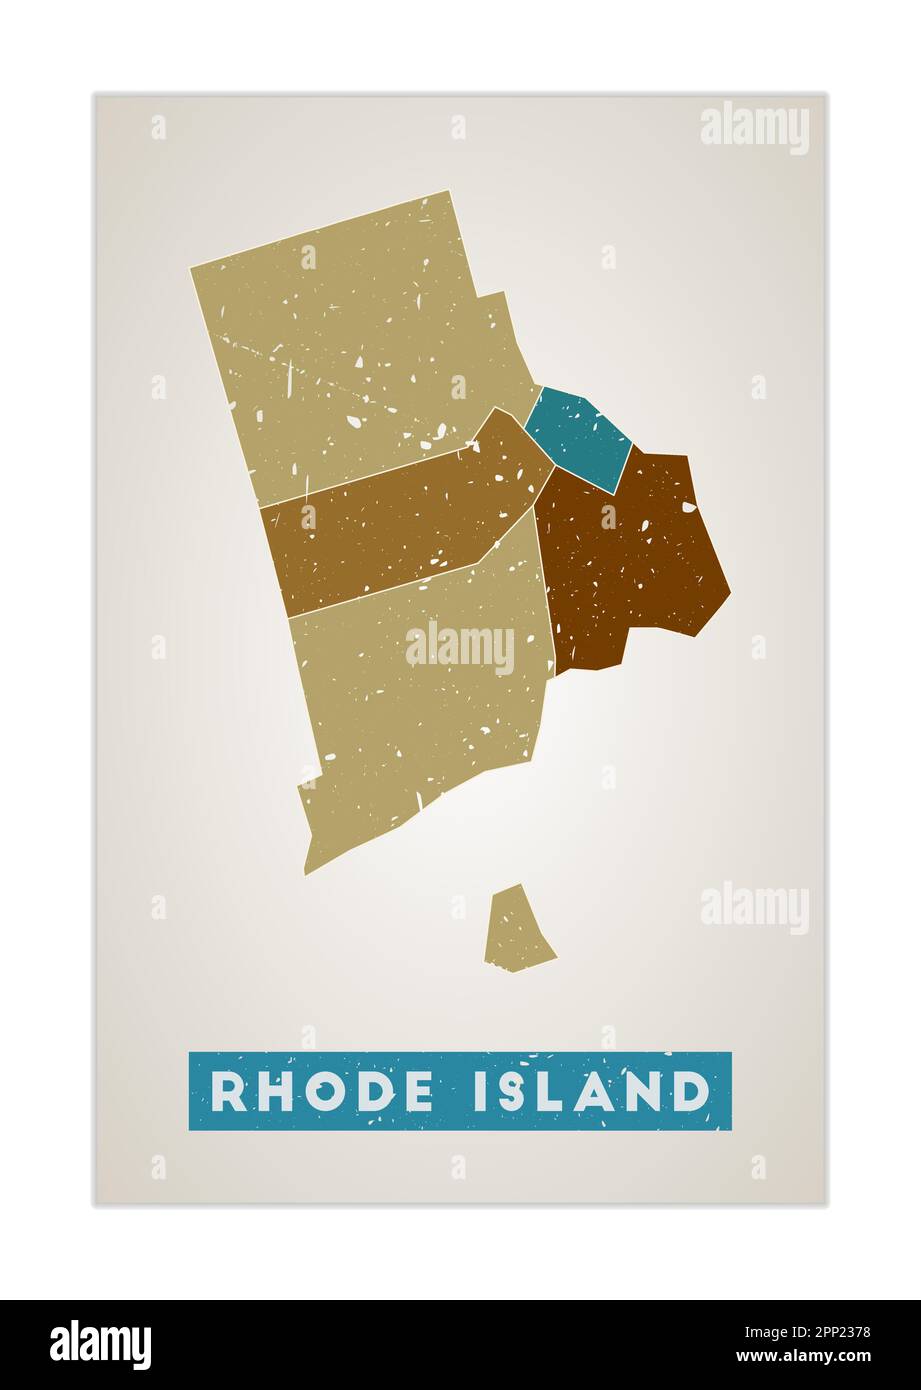 Rhode Island map. Us state poster with regions. Old grunge texture. Shape of Rhode Island with us state name. Elegant vector illustration. Stock Vector